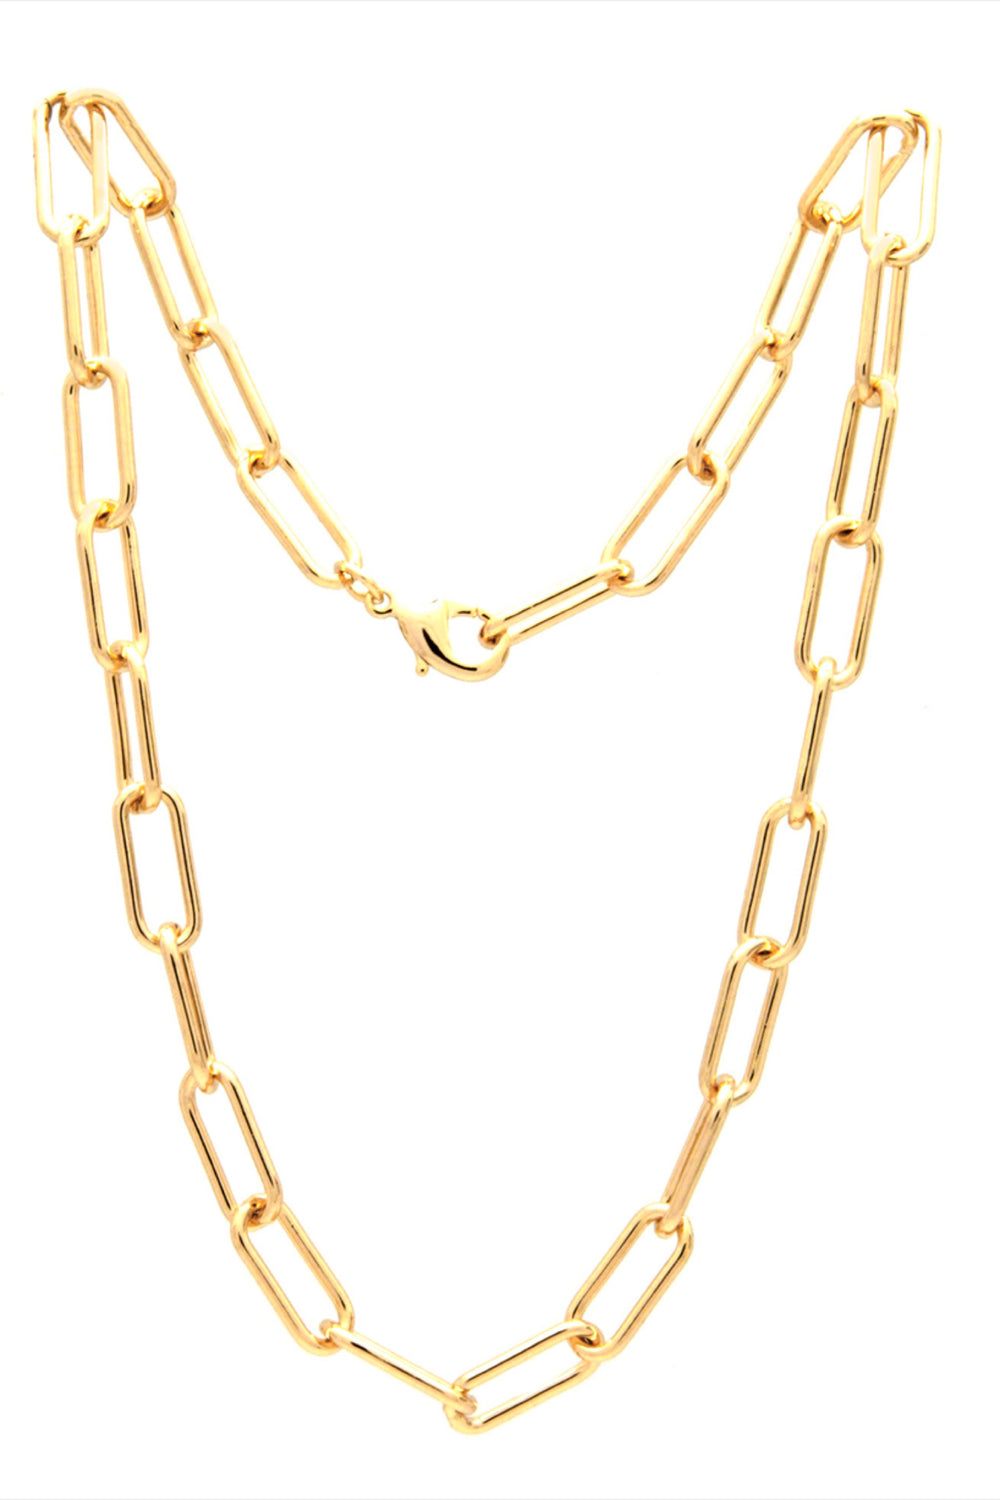 Gold Boss 2.0 Necklace